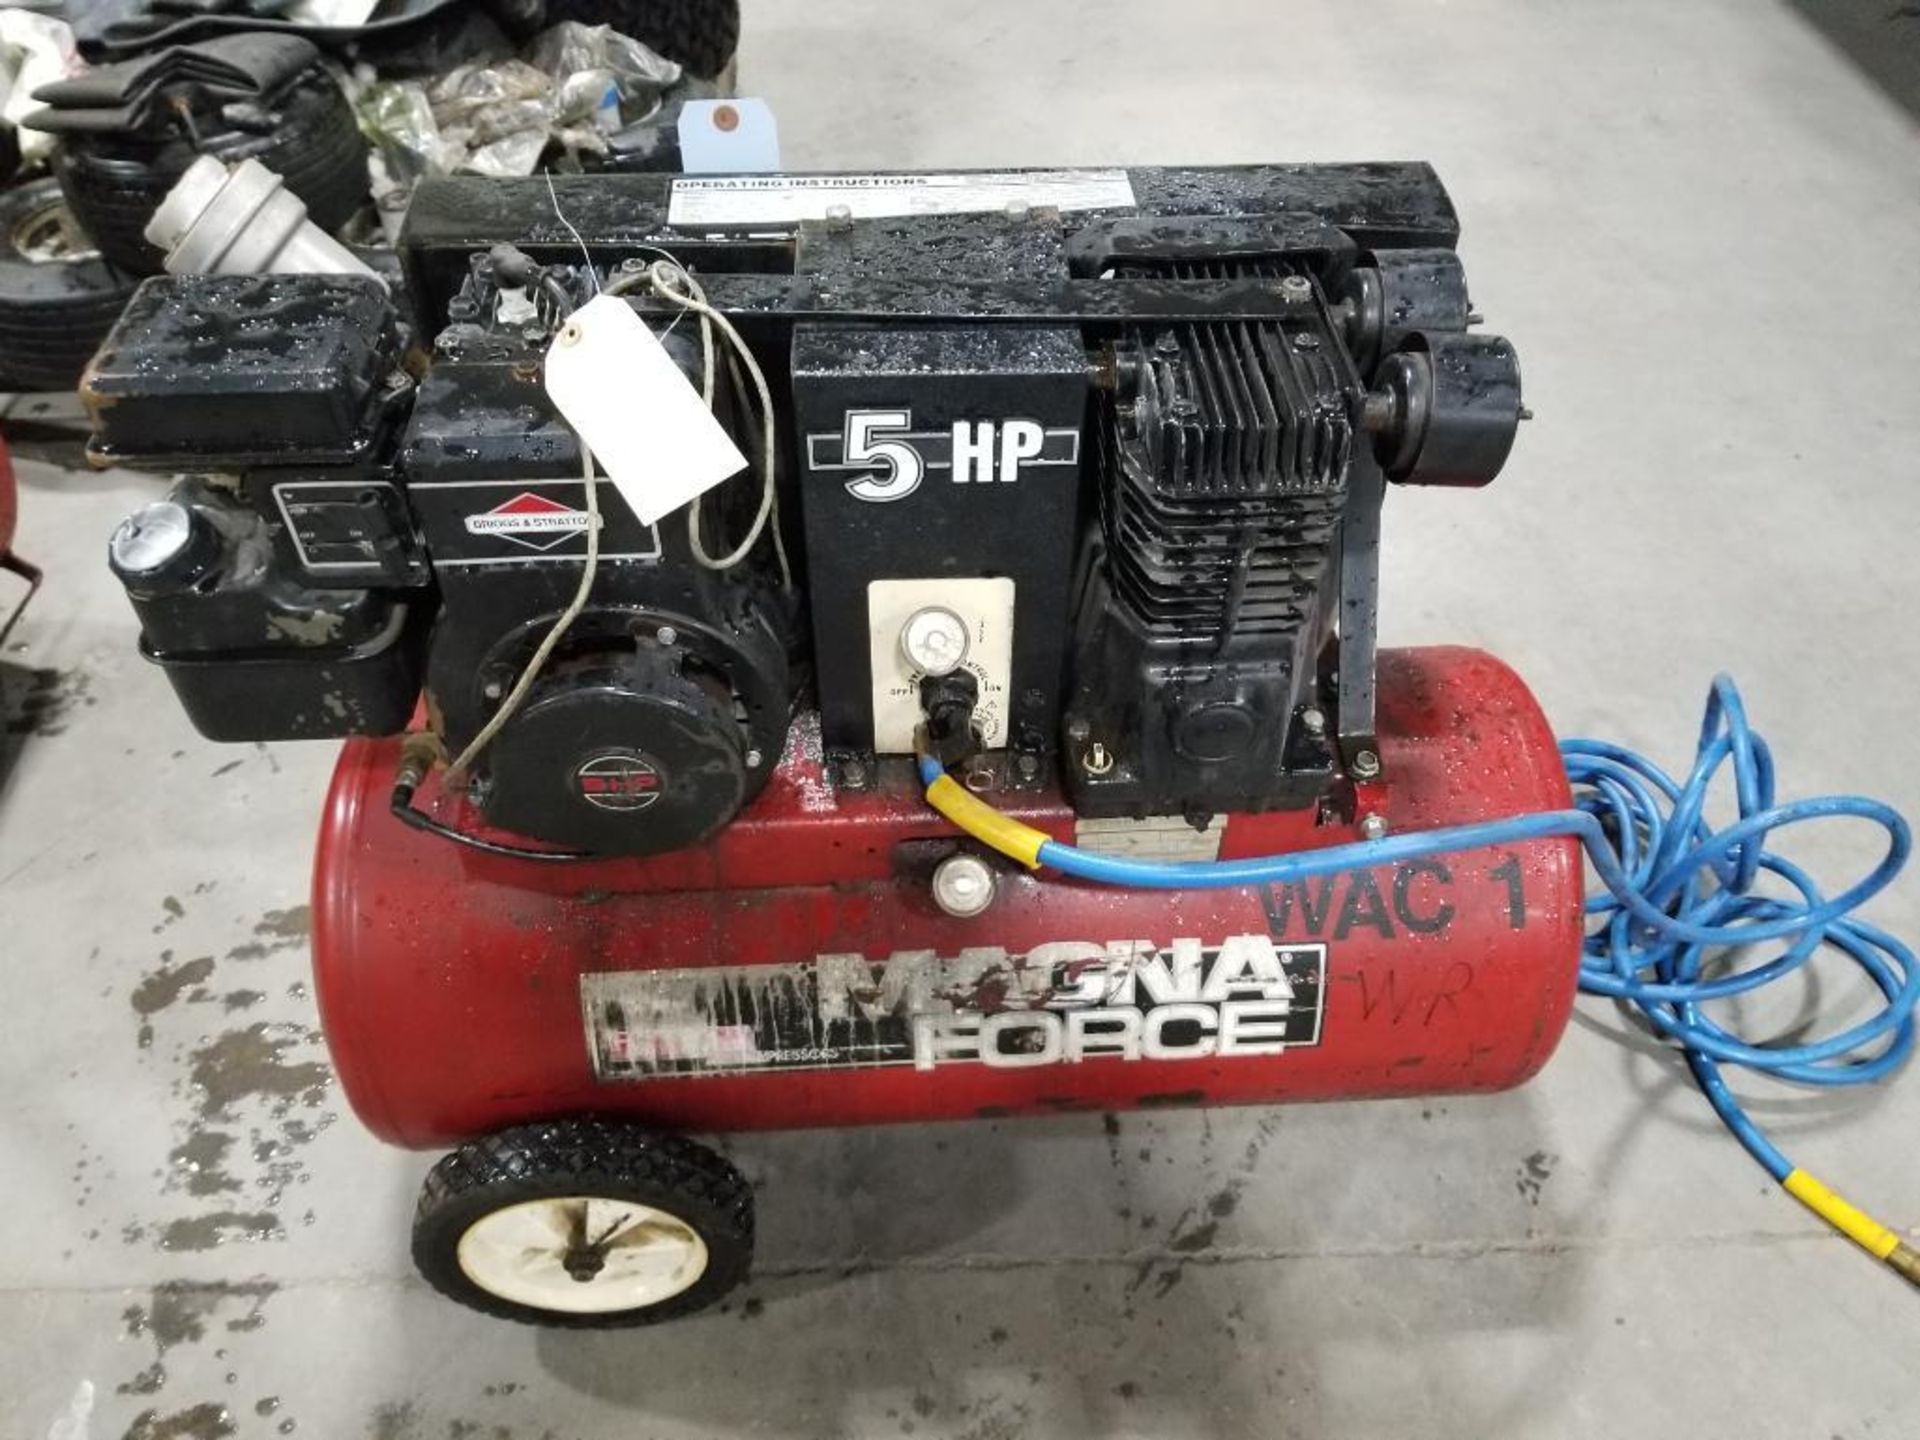 Repairable Briggs and Stratton 5hp air compressor. Needs carb and pull start.